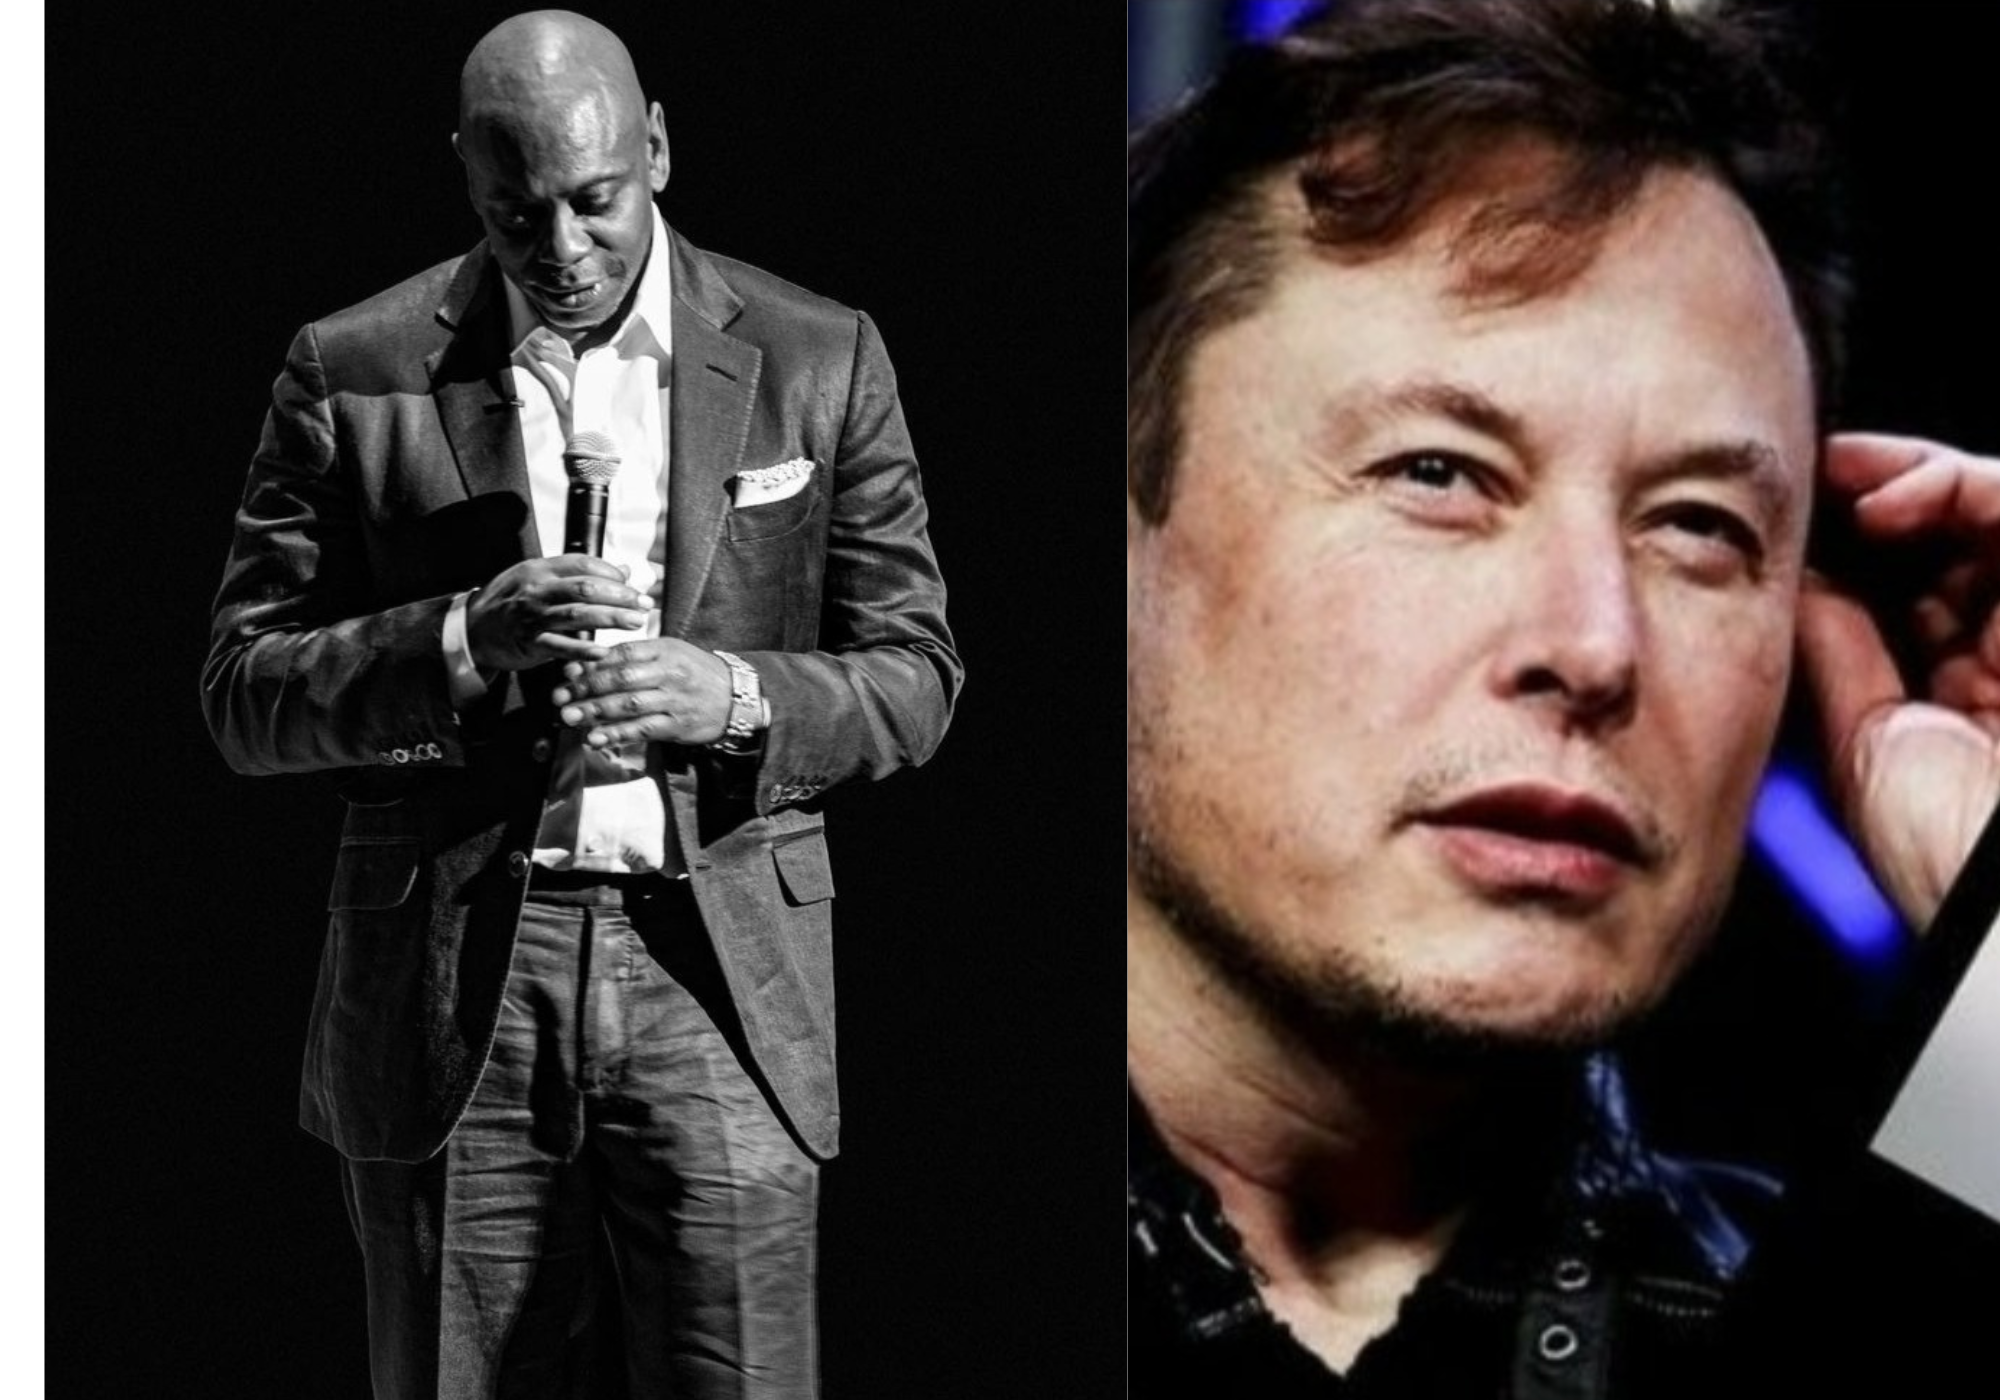 After Kanye West, Dave Chappelle begs Elon Musk not to ‘spoil the moment’ as the crowd boos him

+2023